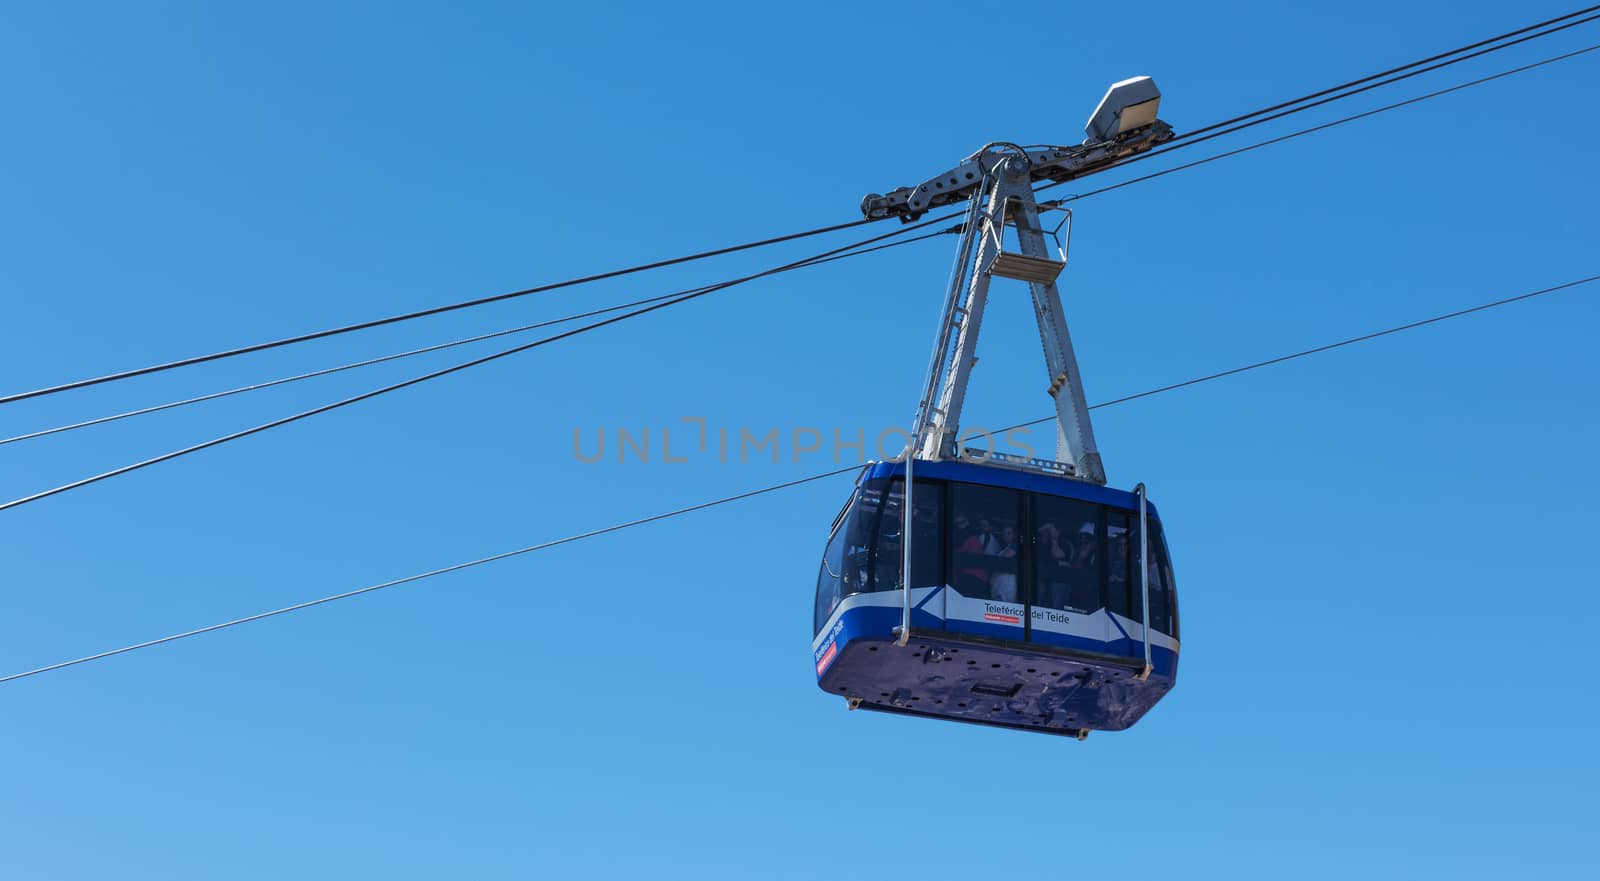 Cabin cable car for tourists visiting the observation deck of the volcano Teide on Tenerife island

